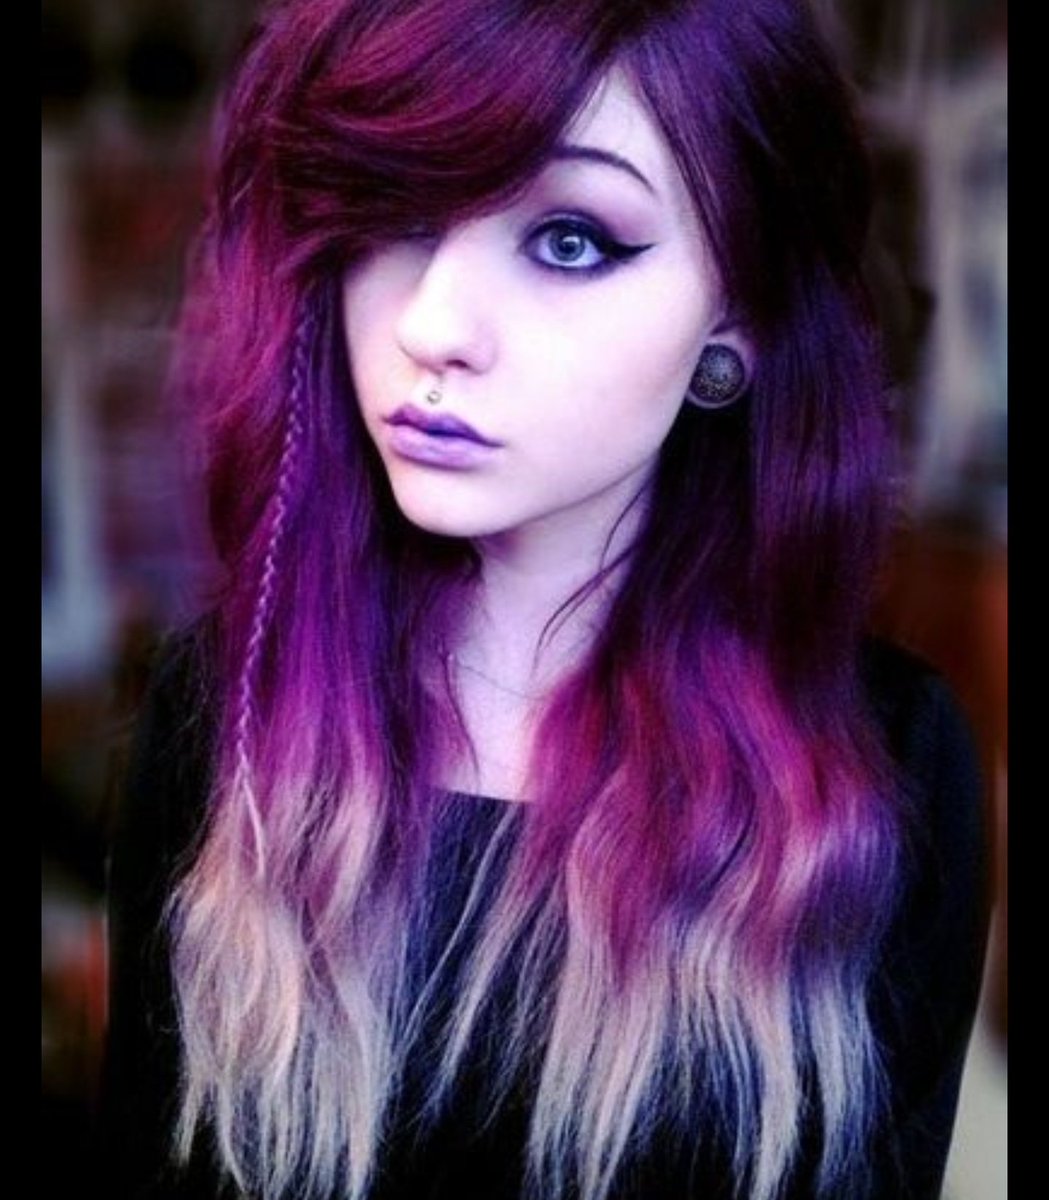 PURPLE HAIR which is your favorite? #purple #rainbow #colors #hairstyle #st...